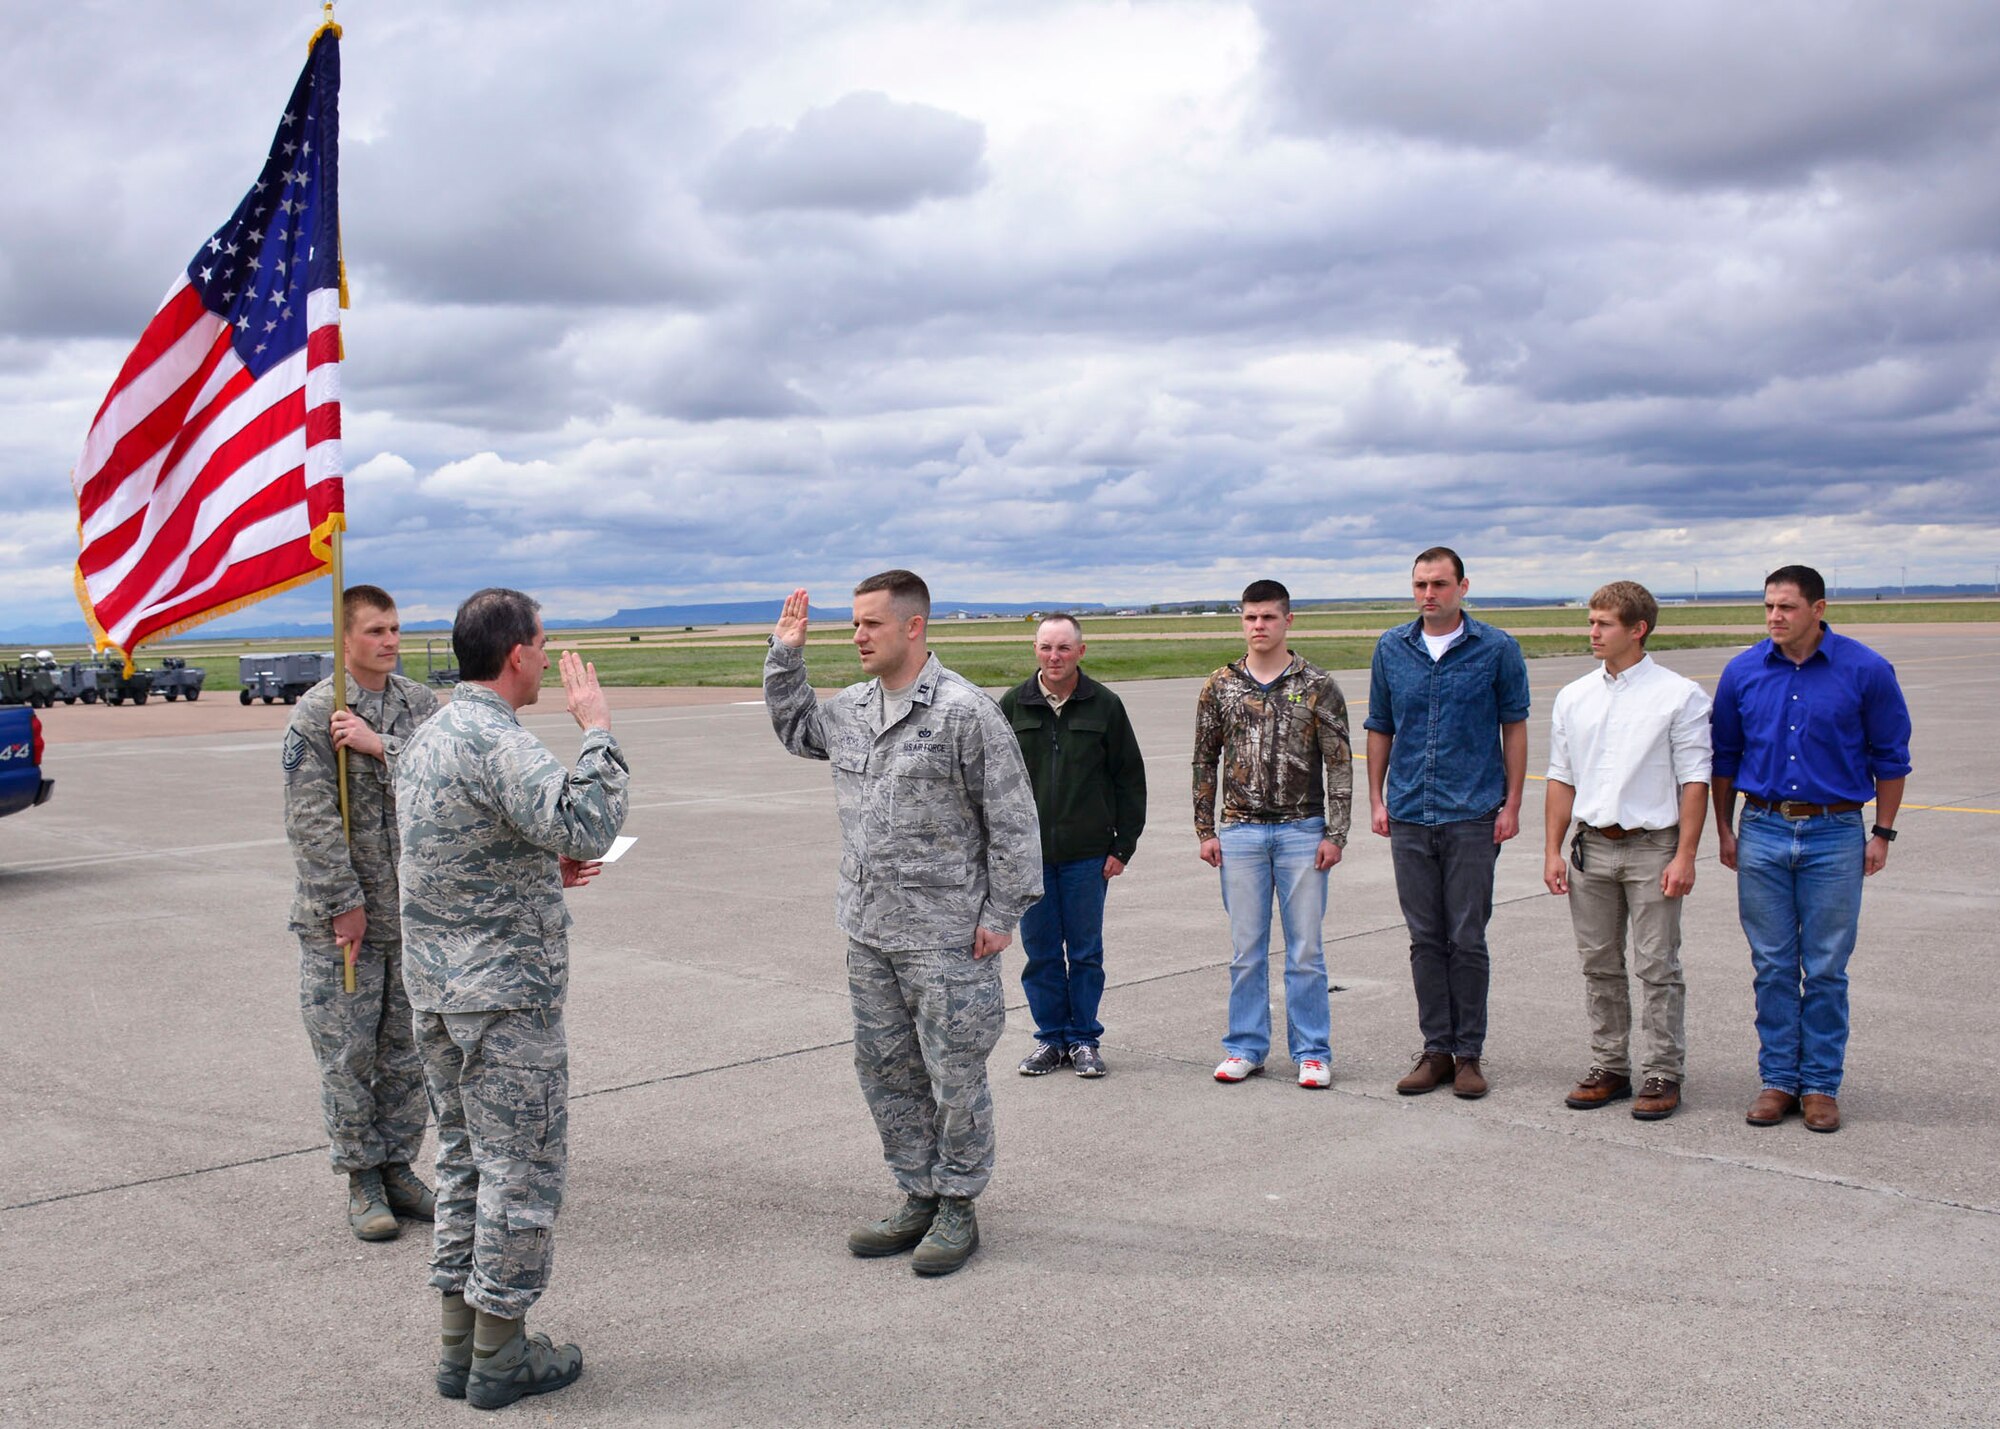 Col. Thomas Mora, 120th Airlift Wing vice commander, swears in Capt. Kevin Ochs, 219th RED HORSE engineer, on the 120th Airlift Wing flight line in front of a C-130 Hercules April 30, 2016. Ochs lead five new enlistees through the initial oath of enlistment after taking his oath. (U.S. Air National Guard photo/Senior Master Sgt. Eric Peterson)